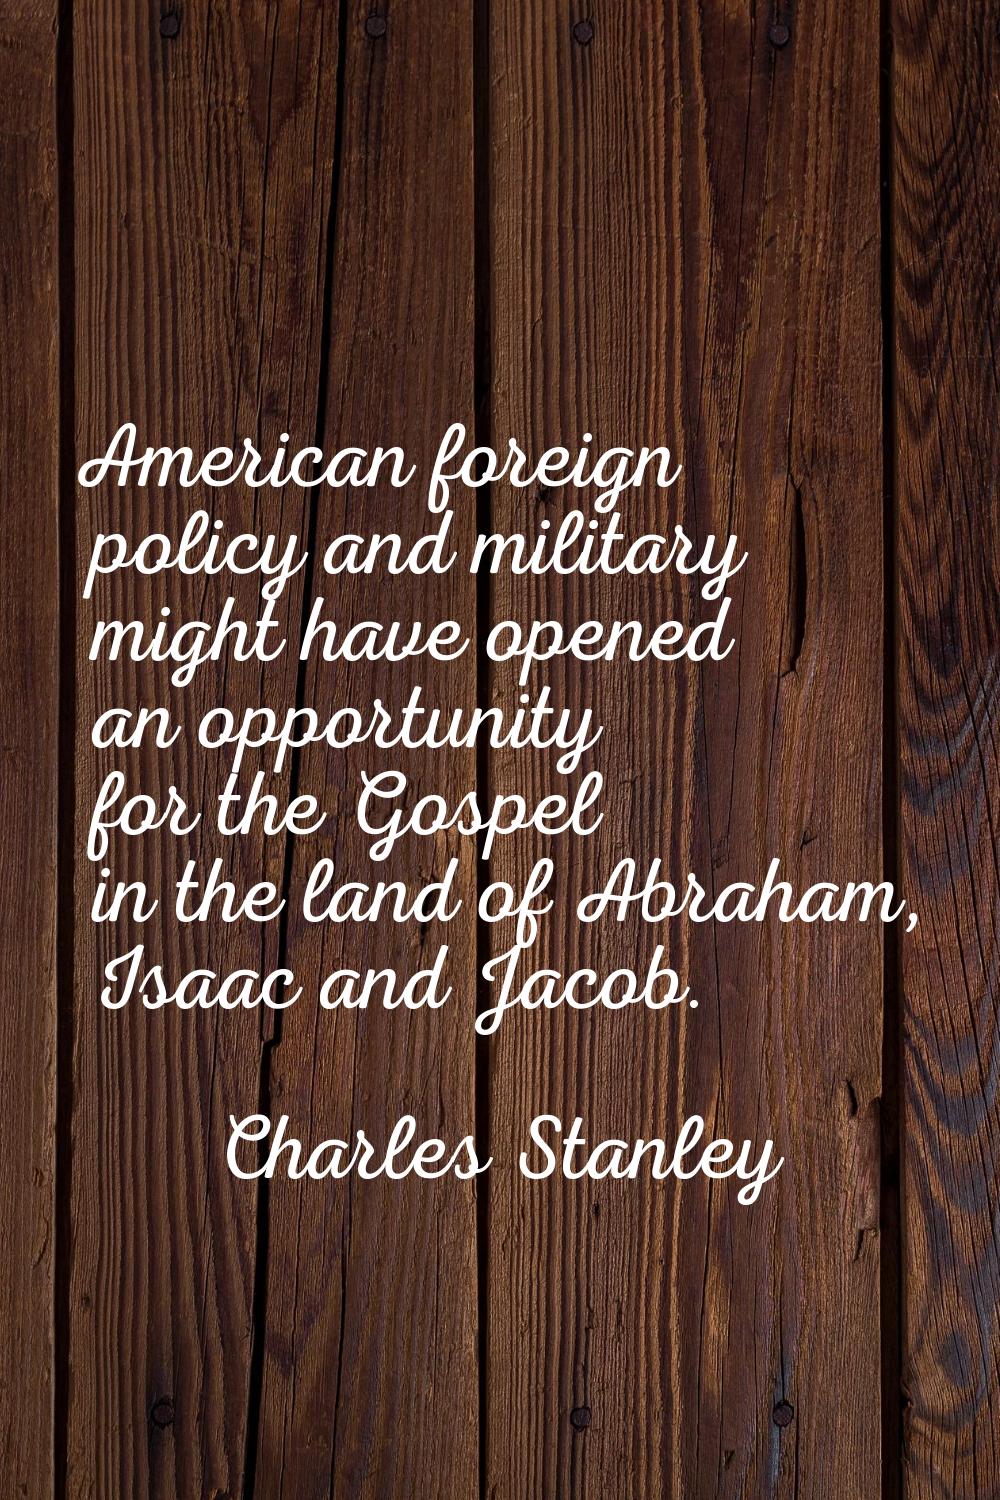 American foreign policy and military might have opened an opportunity for the Gospel in the land of